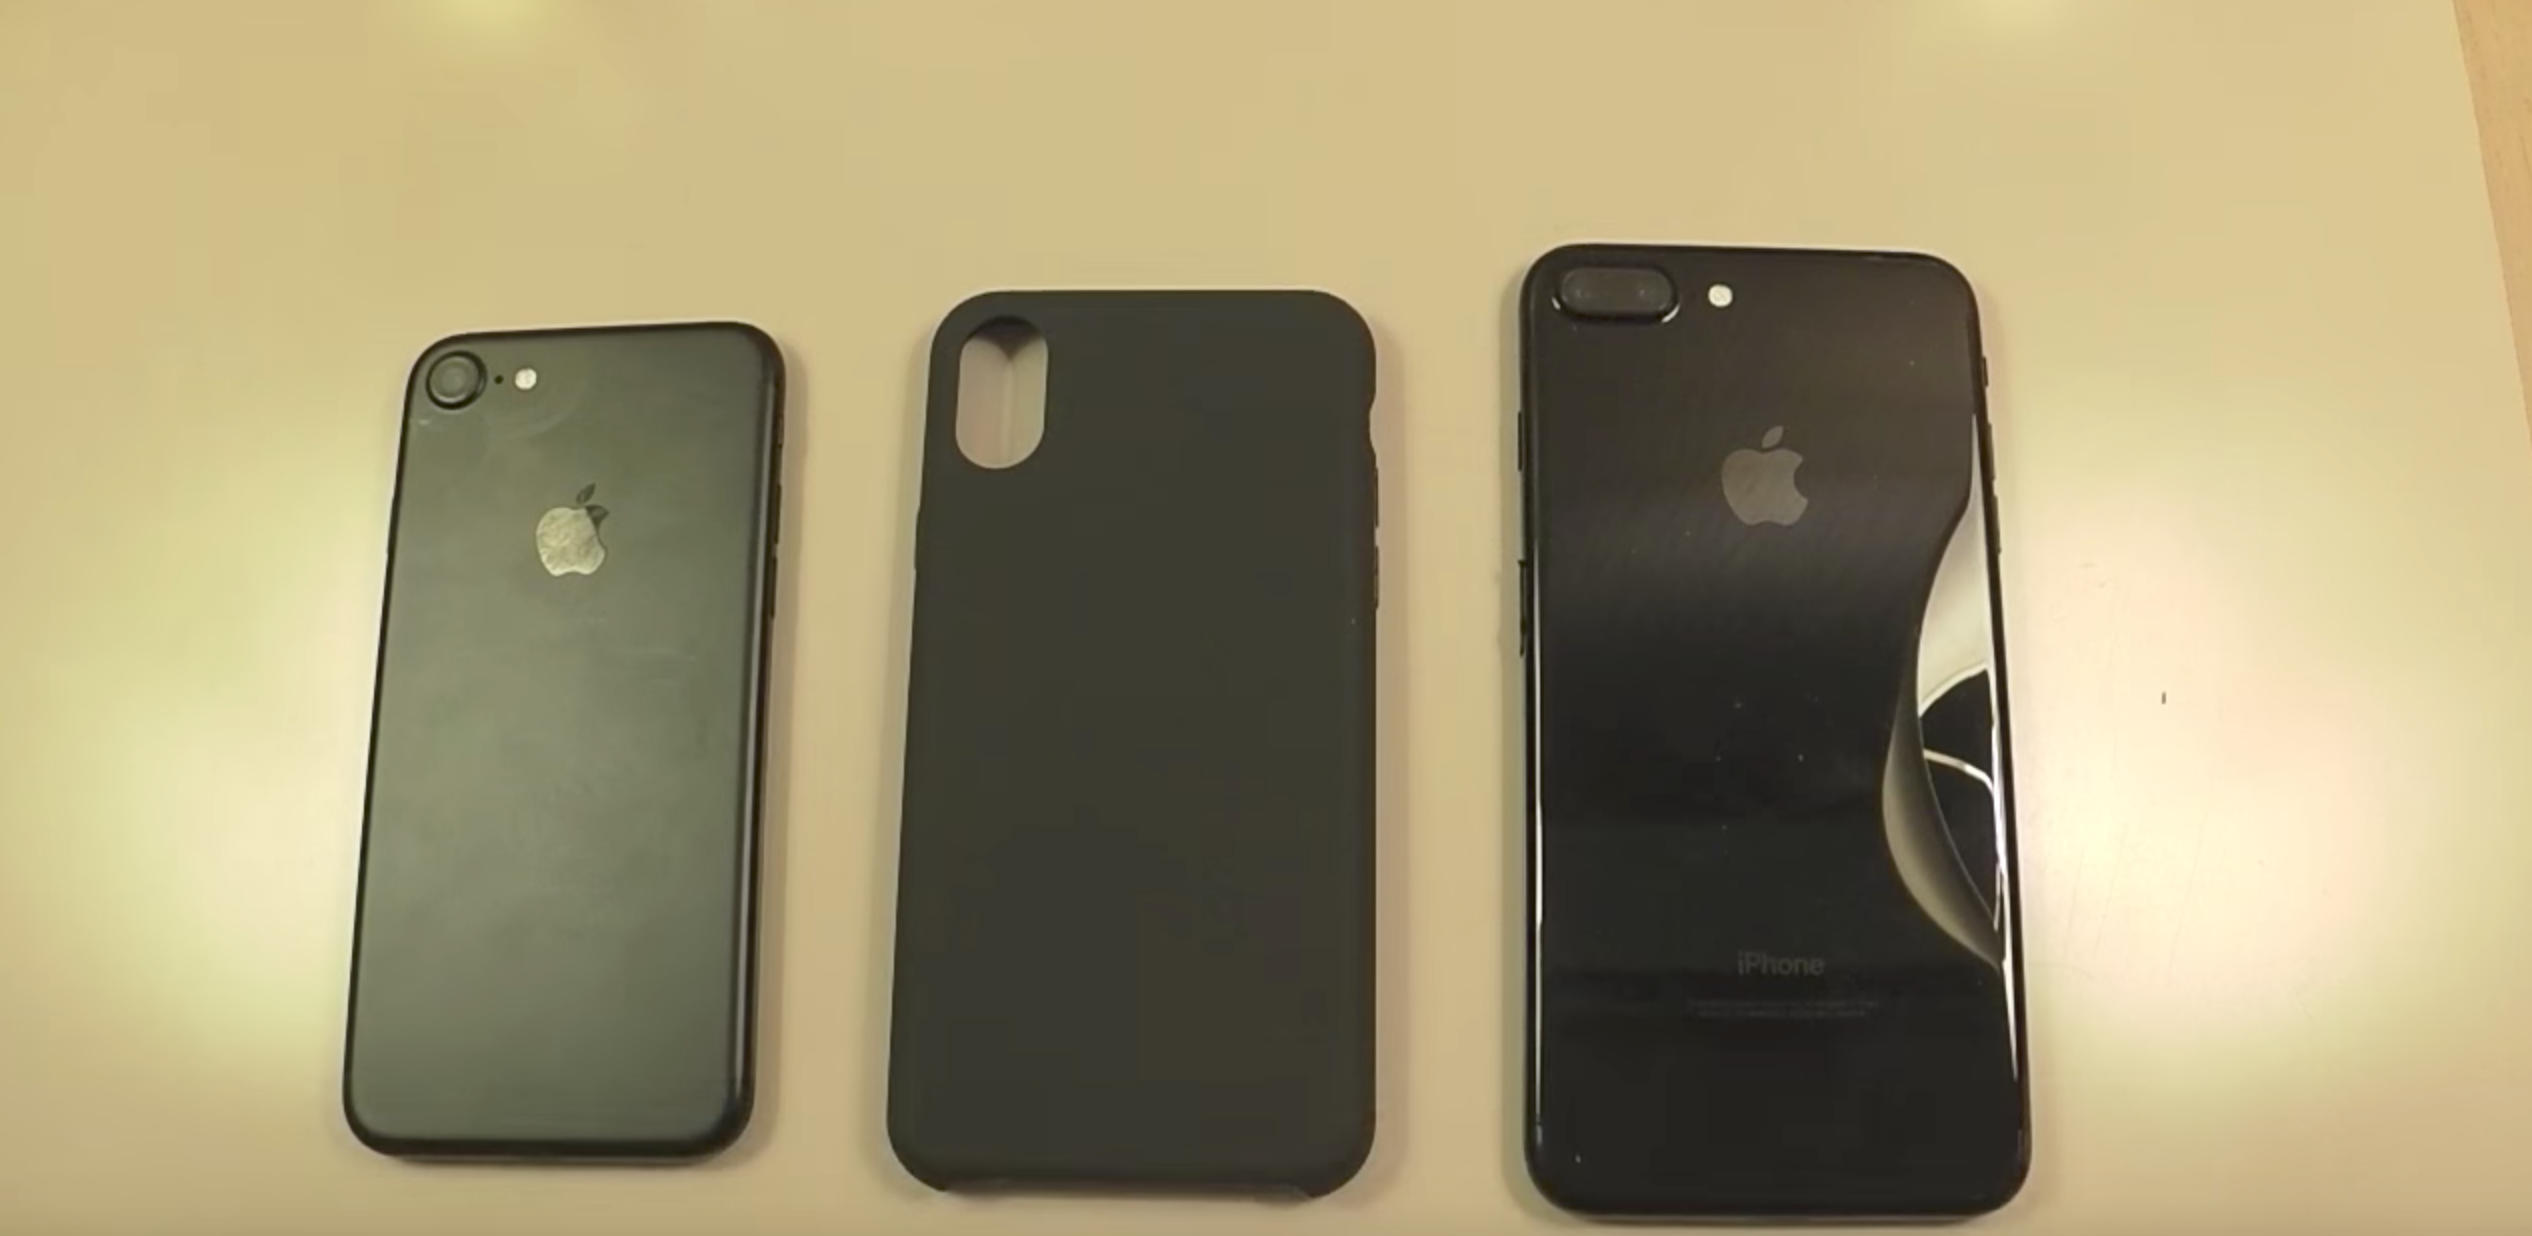 Rengør soveværelset fjols blæk iPhone 8 case leak claims to show device compared to iPhone 7 & iPhone 7  Plus [Video] - 9to5Mac